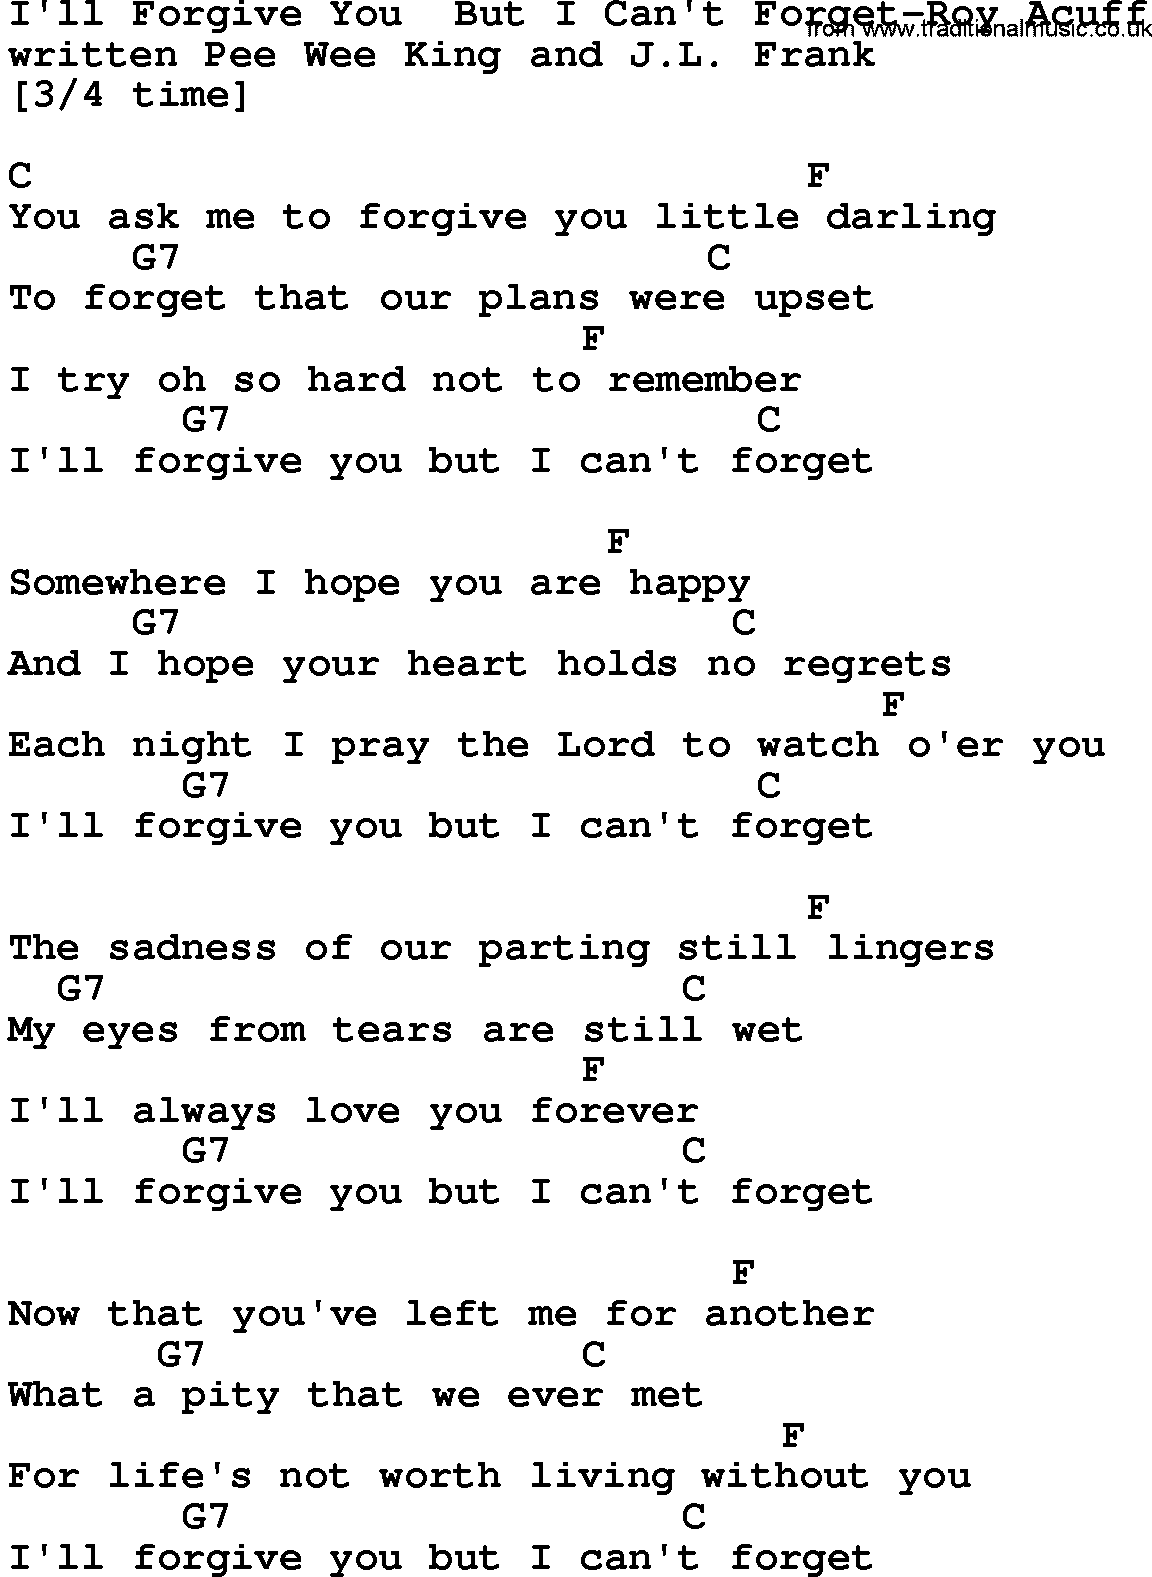 Country music song: I'll Forgive You But I Can't Forget-Roy Acuff lyrics and chords